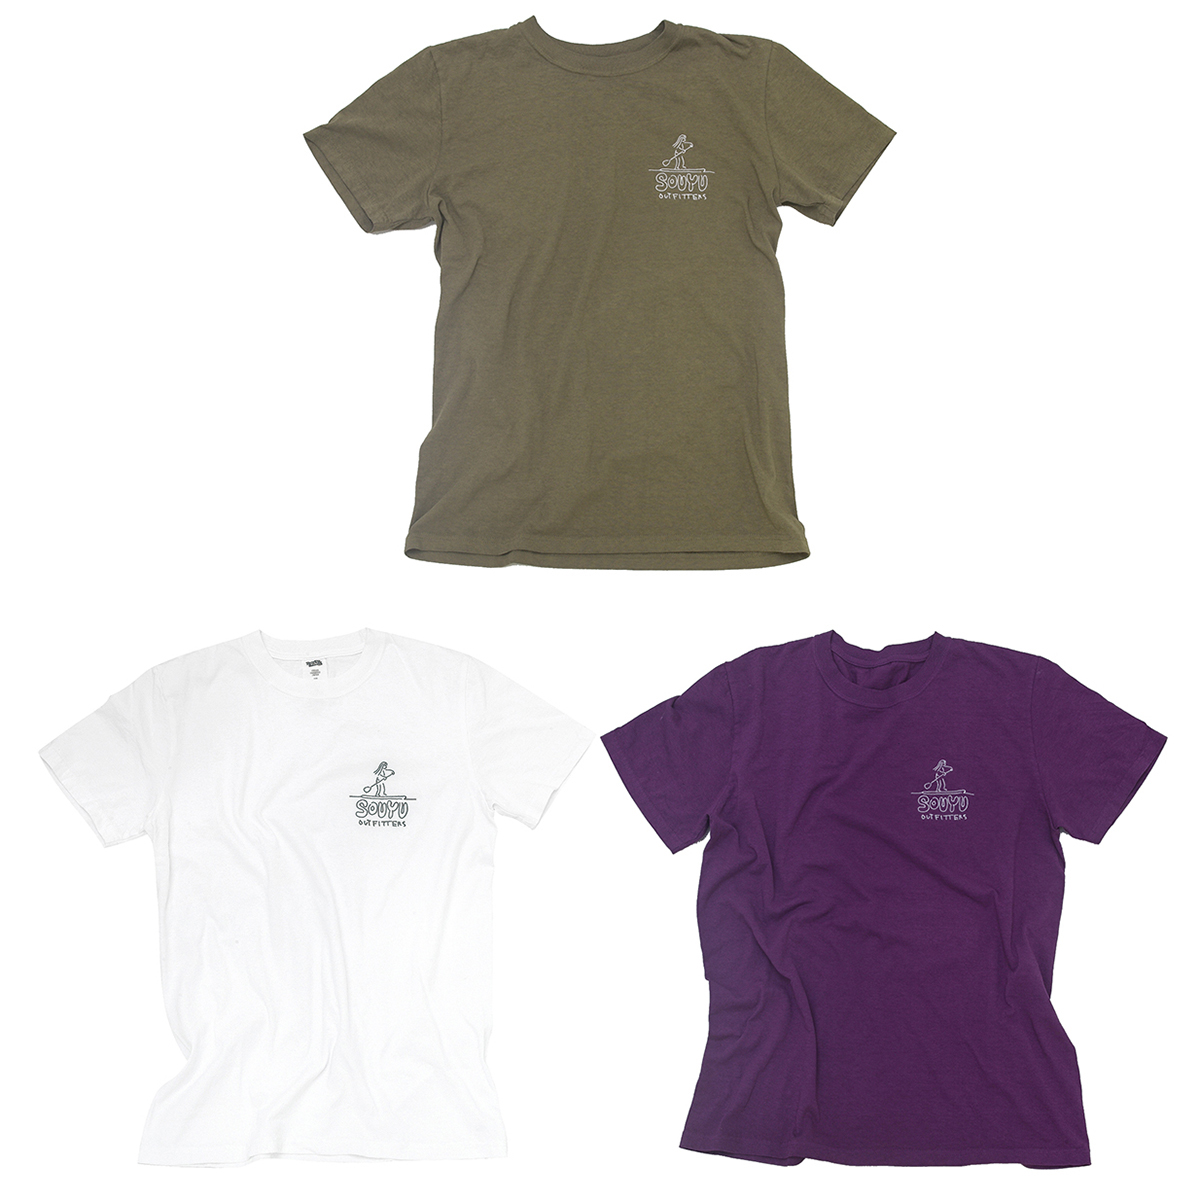 SOUYUMAN TEE ソウユウマン T シャツ Number : s20-so-10B Fabric : Cotton 100% Size : XS, S, M, L, XL Color:Olive, White, Purple Price : ¥4,800